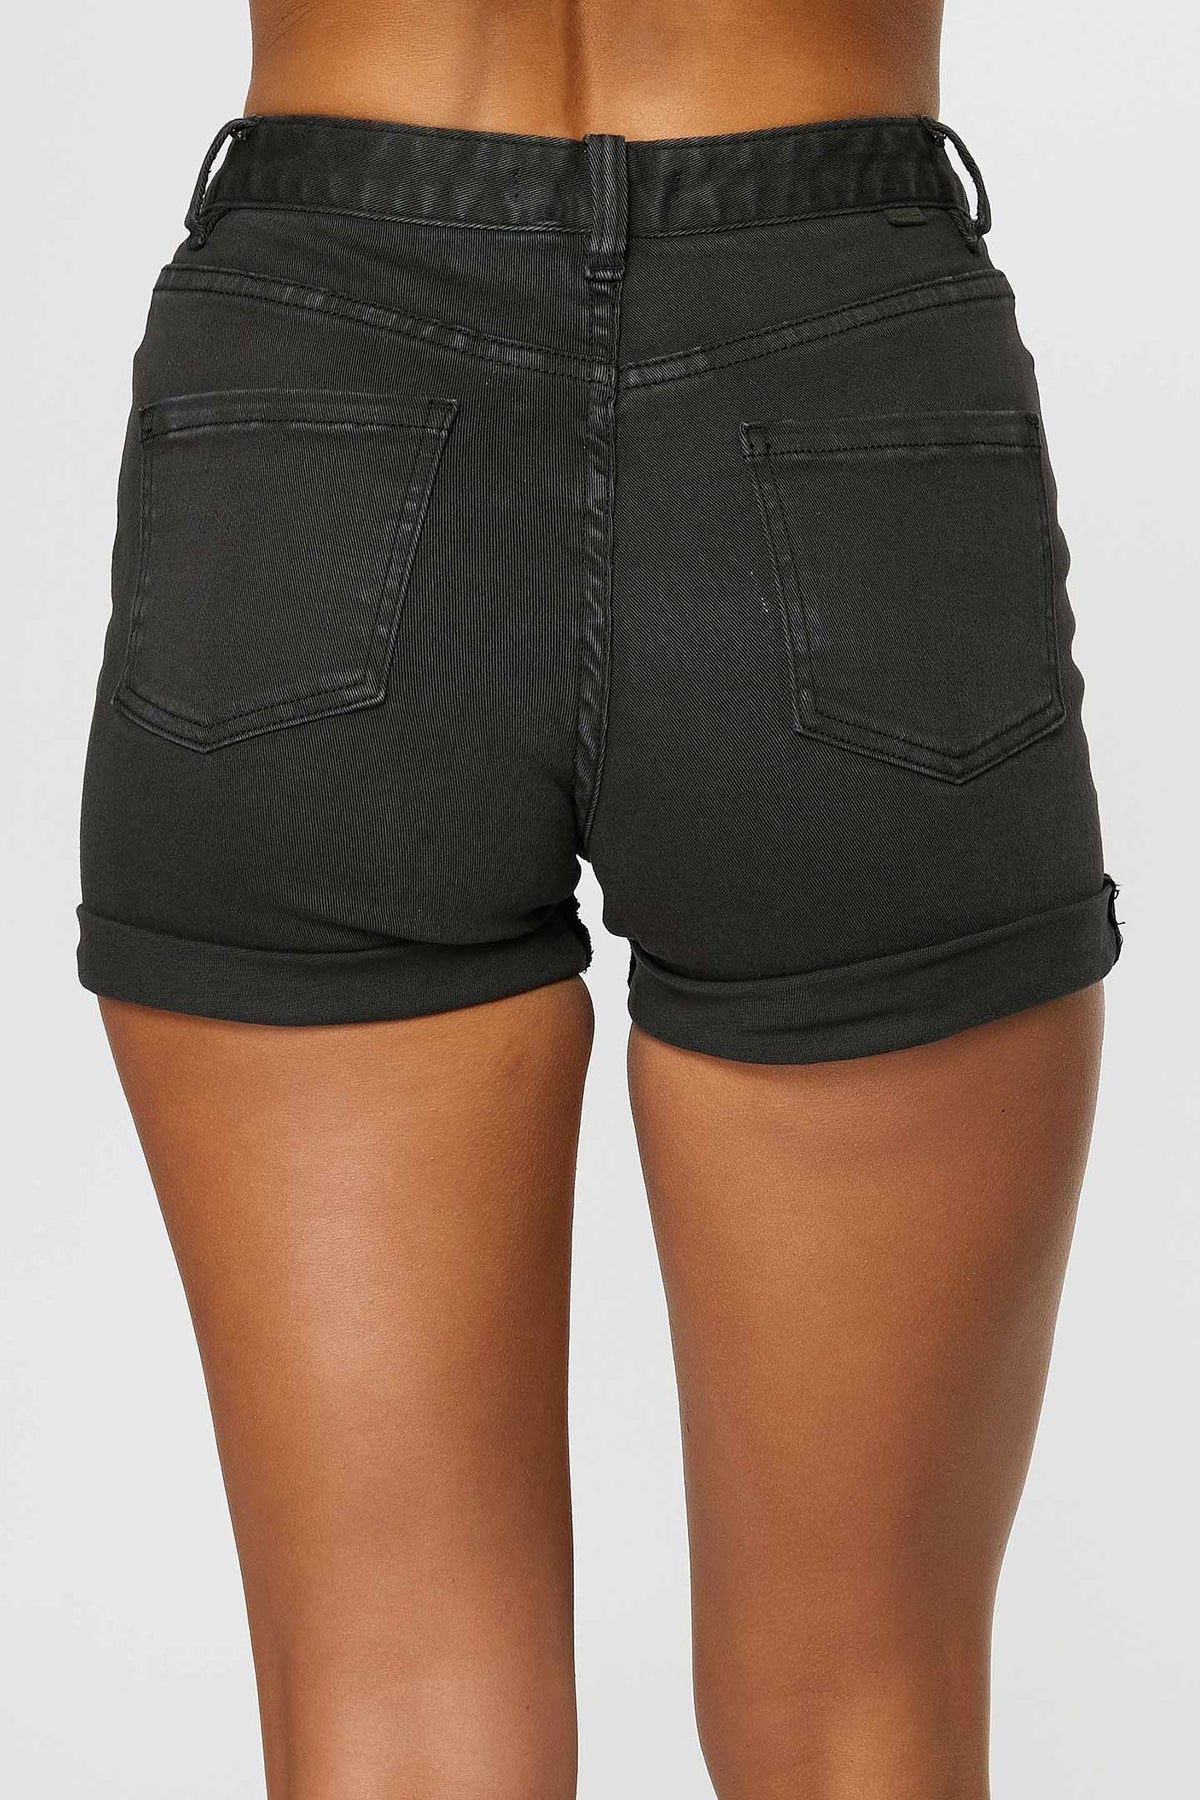 O'Neill Kelsey Denim Shorts (Non-Current)